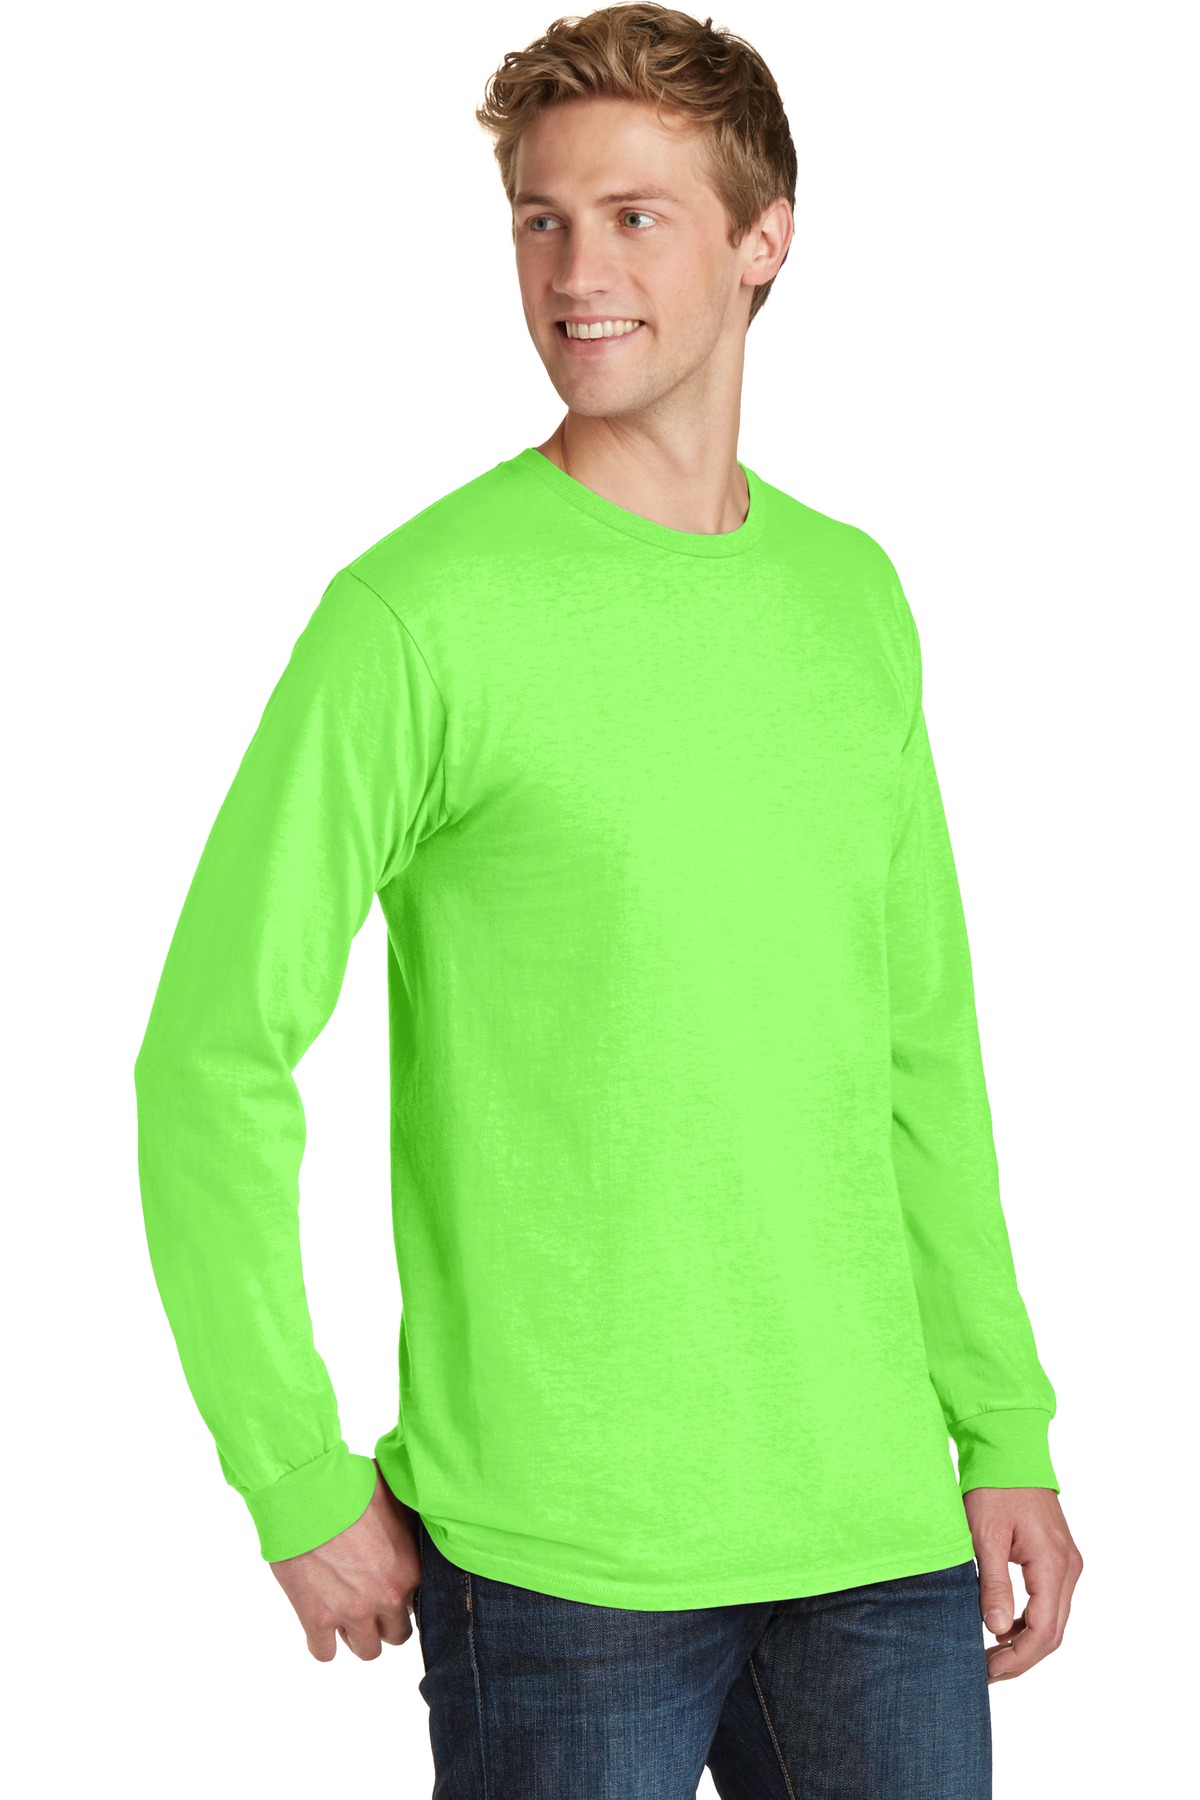 Port & Company Pigment Dyed Long Sleeve Tee-XL (Neon Green) - image 4 of 6